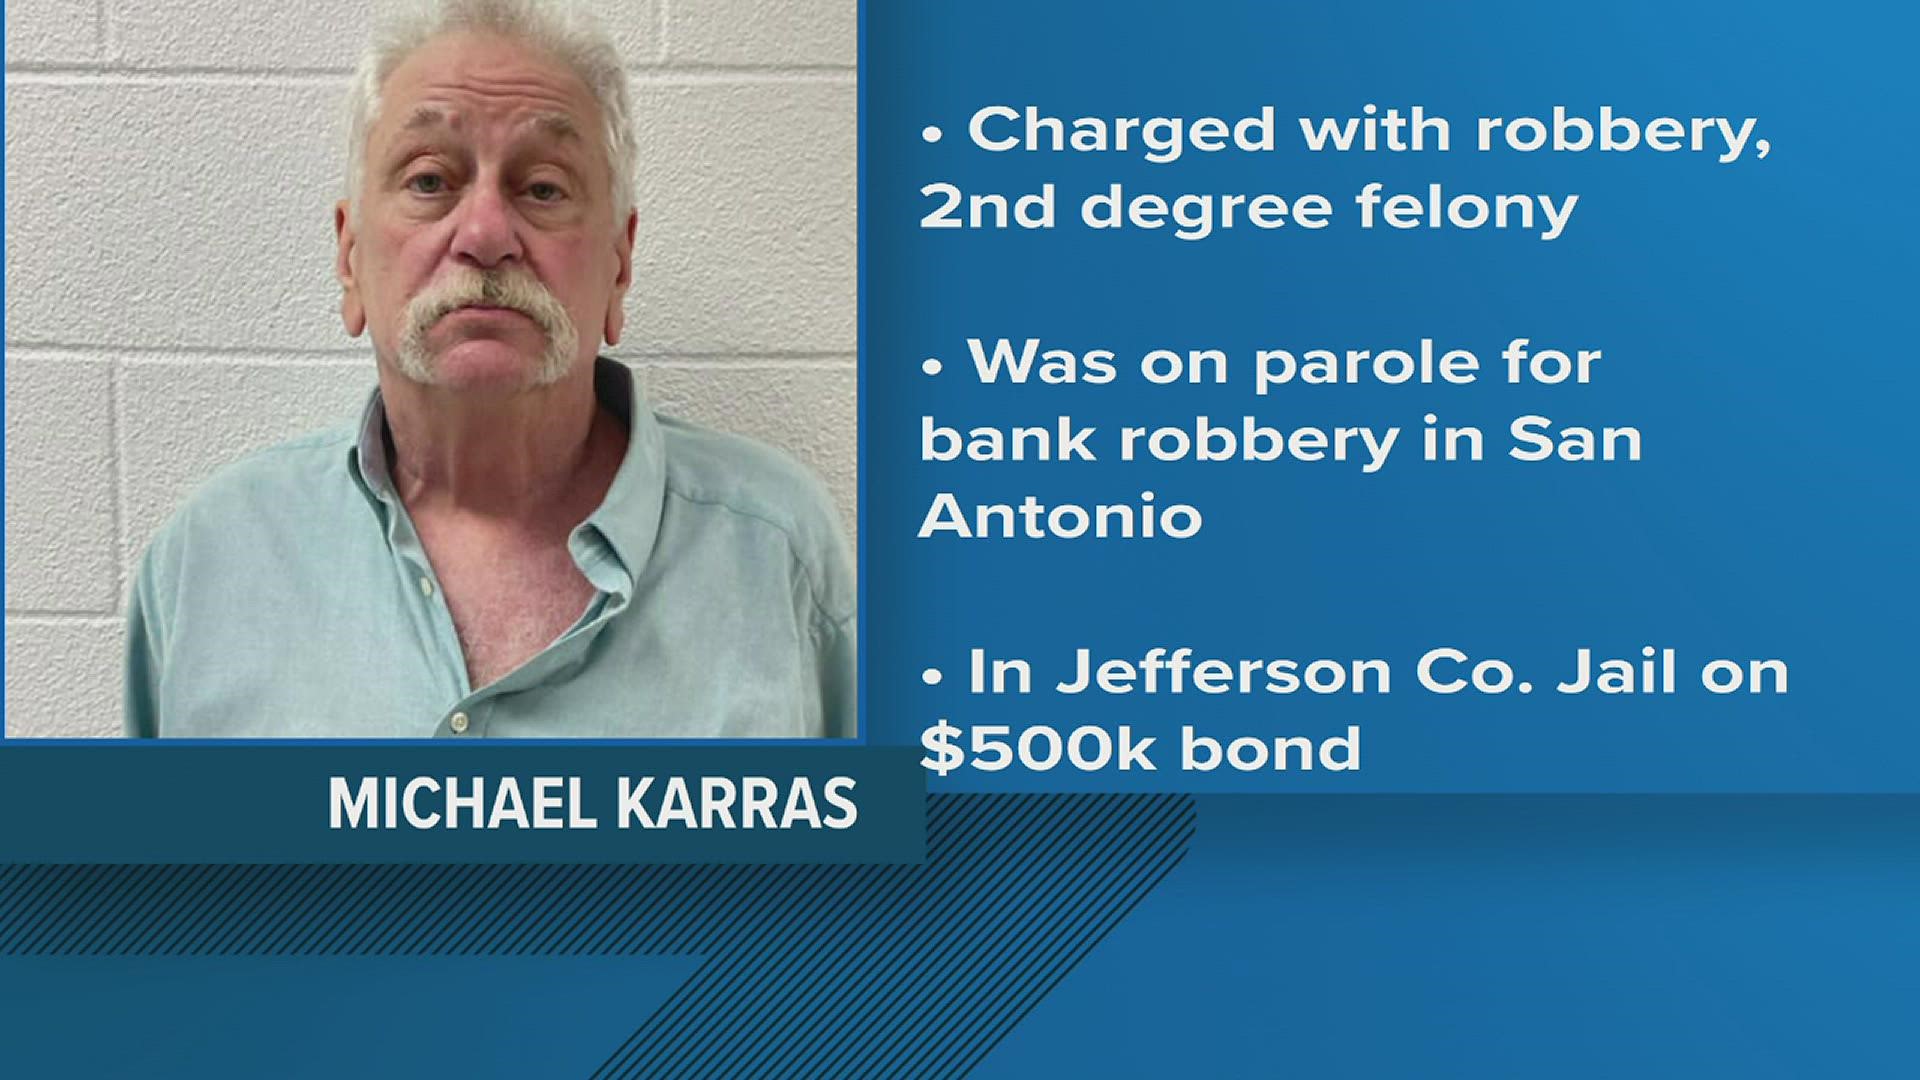 Michael Karras was out on parole in connection with a previous bank robbery in San Antonio when the Beaumont robbery took place.